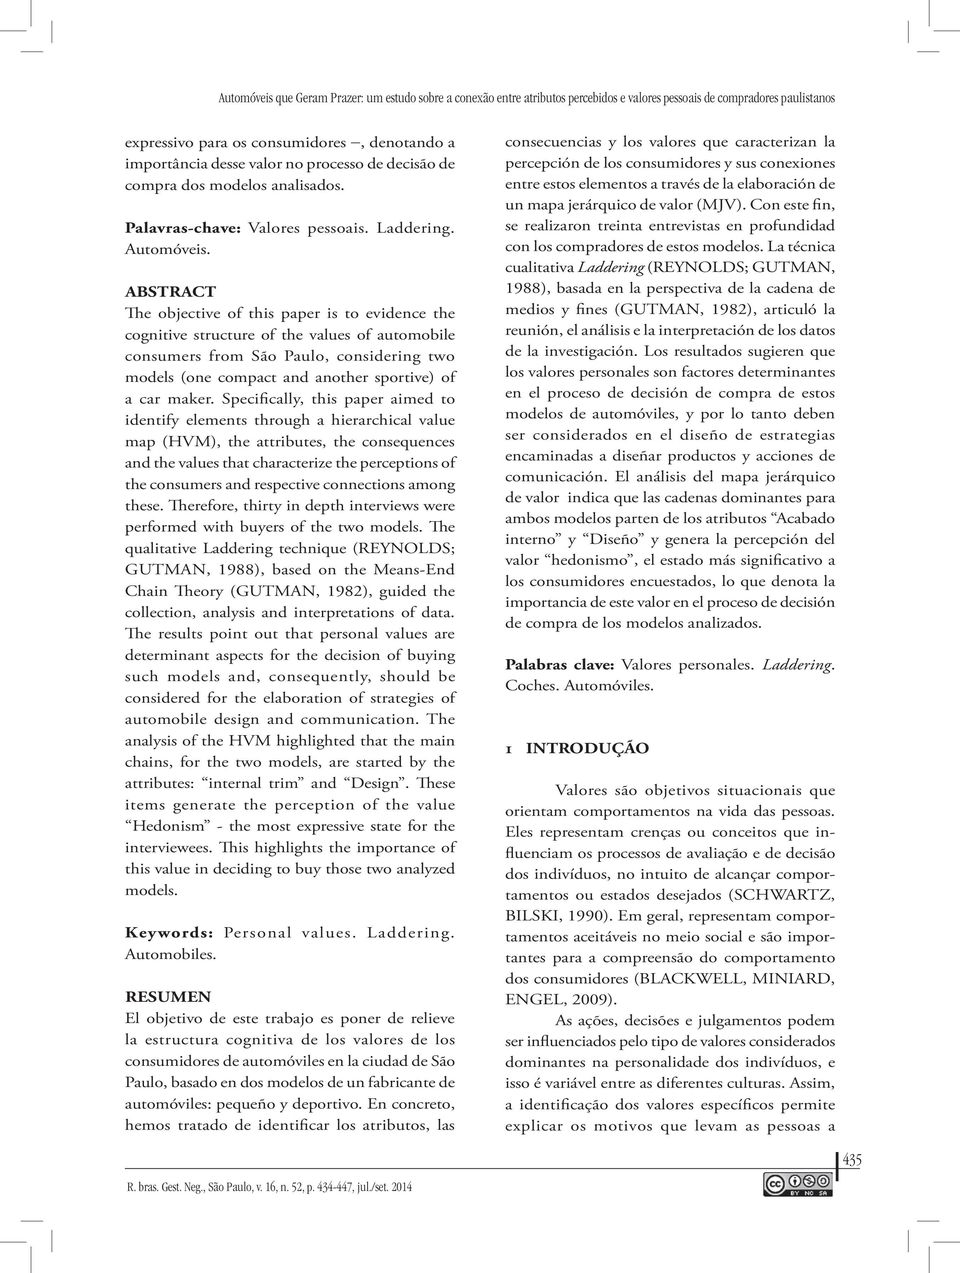 ABSTRACT The objective of this paper is to evidence the cognitive structure of the values of automobile consumers from São Paulo, considering two models (one compact and another sportive) of a car